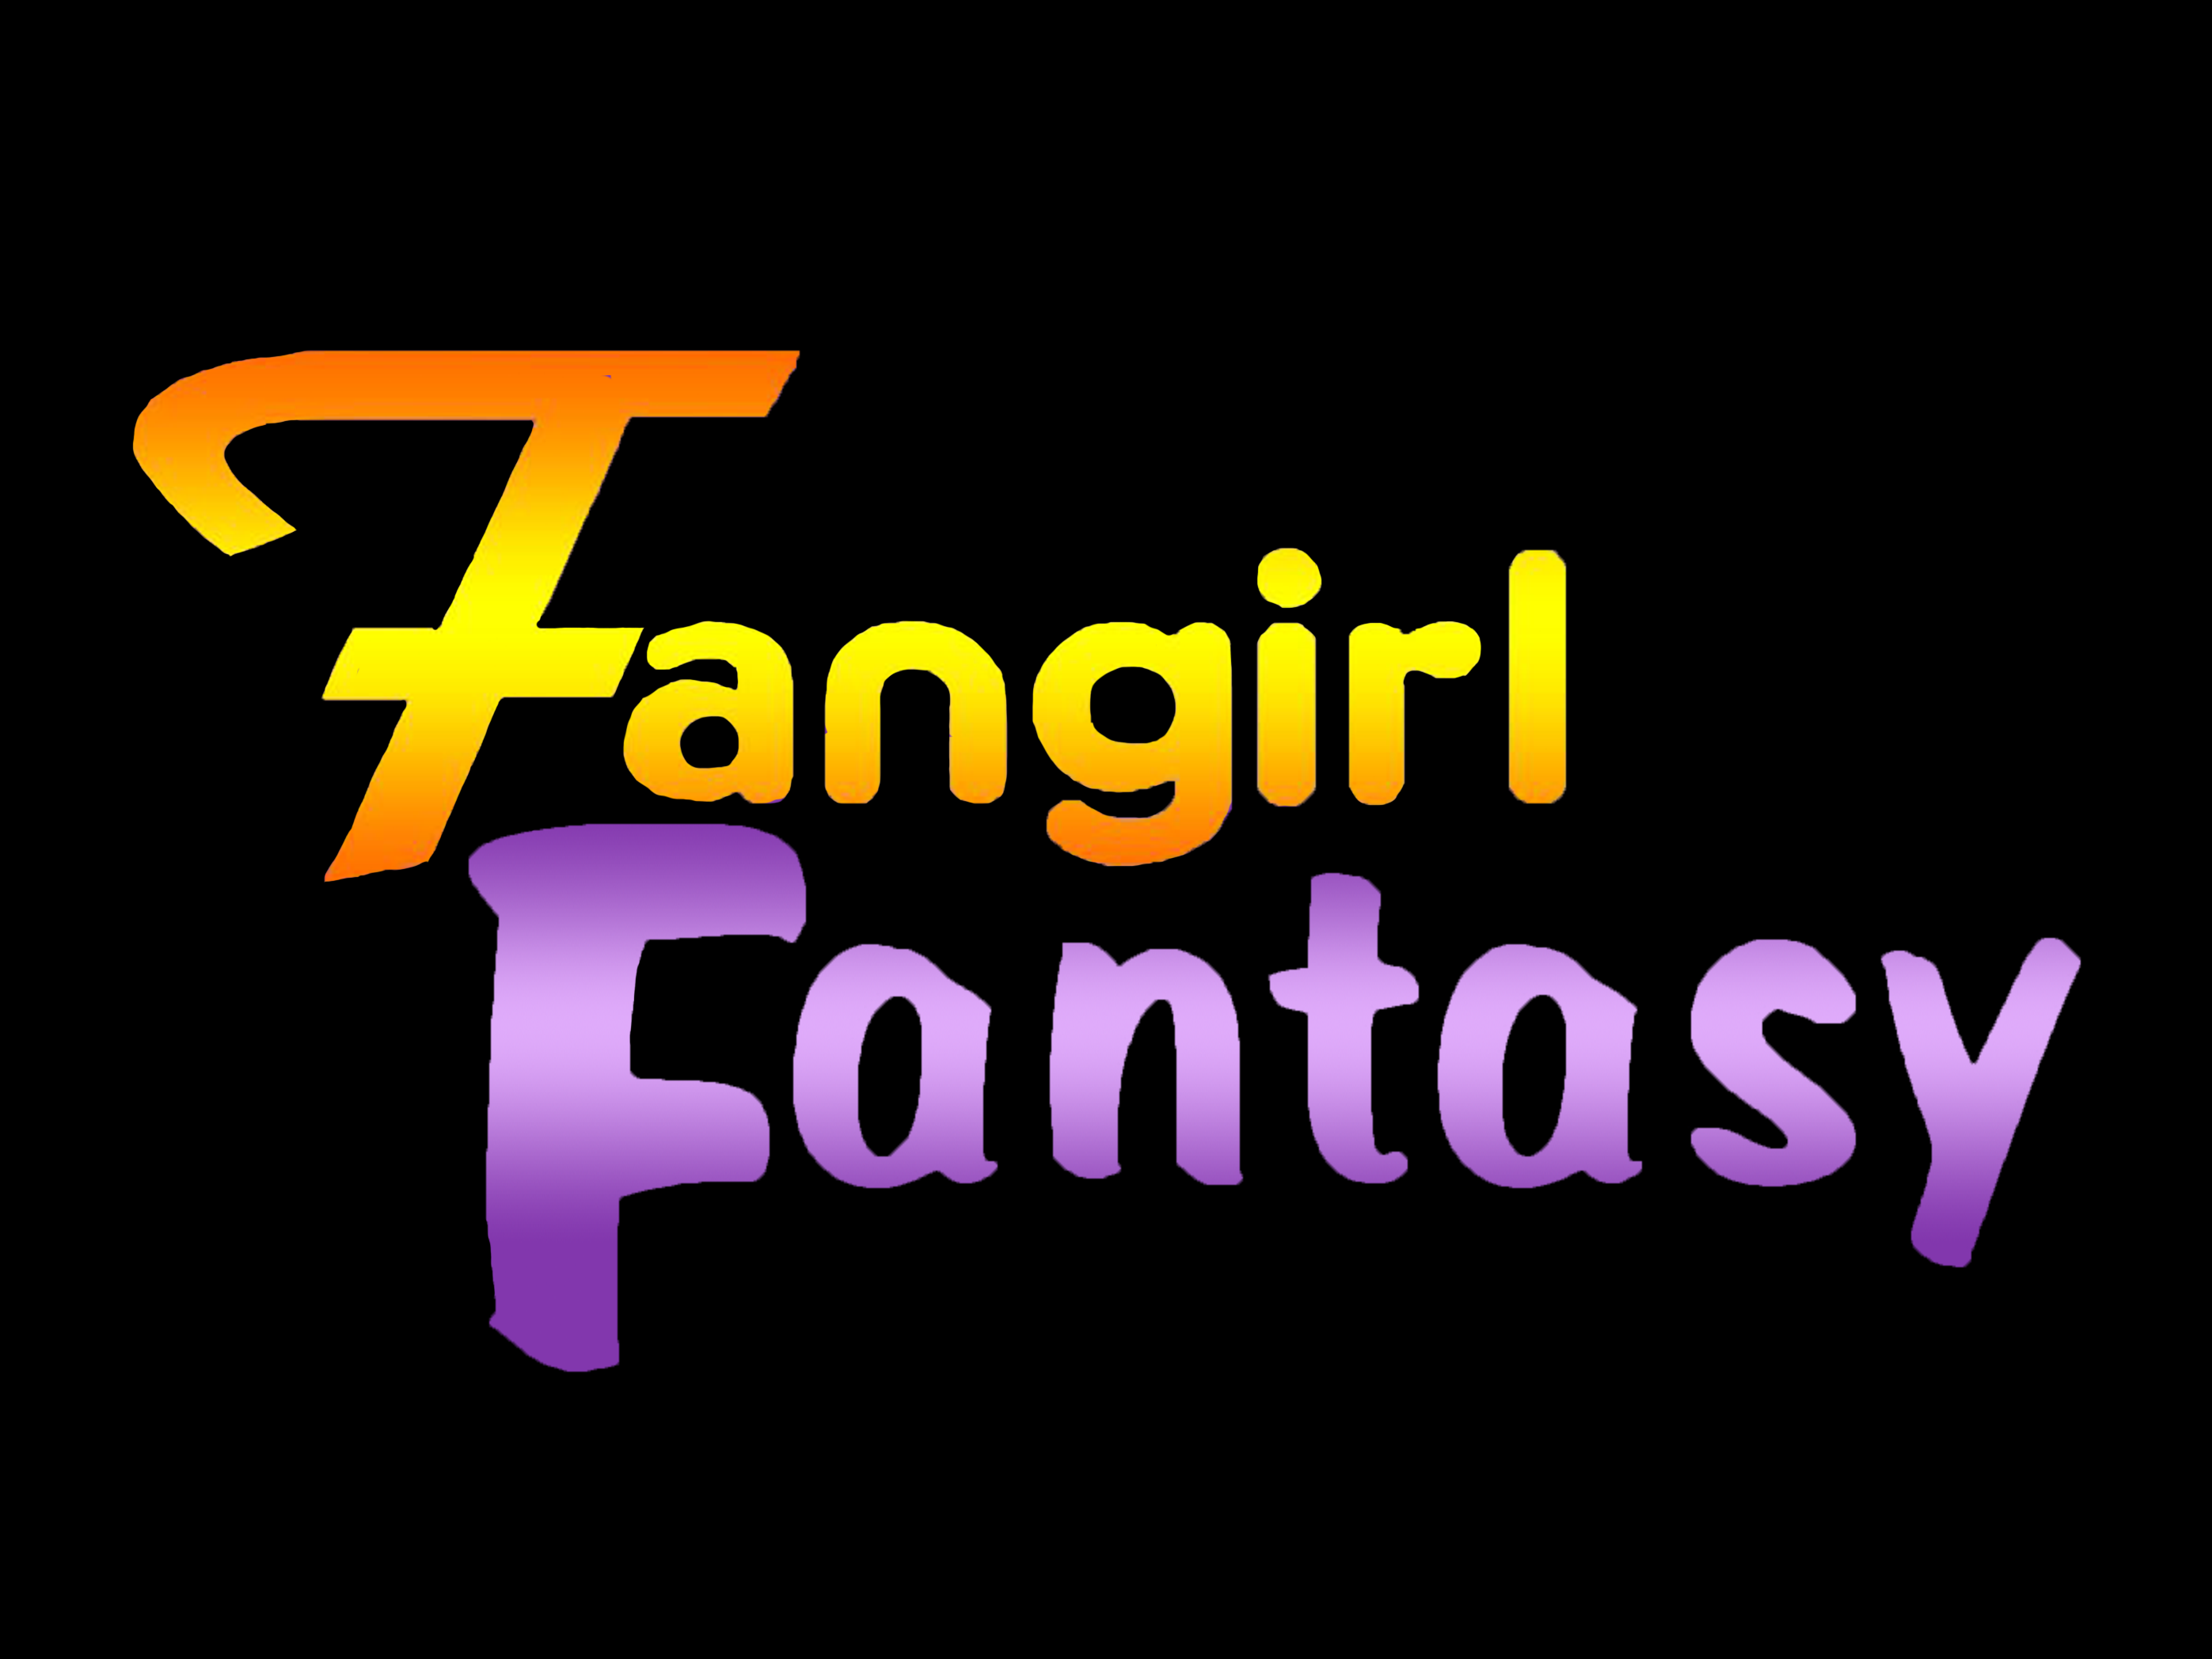 Fangirl Fantasy: Taylor Swift Album Release Party